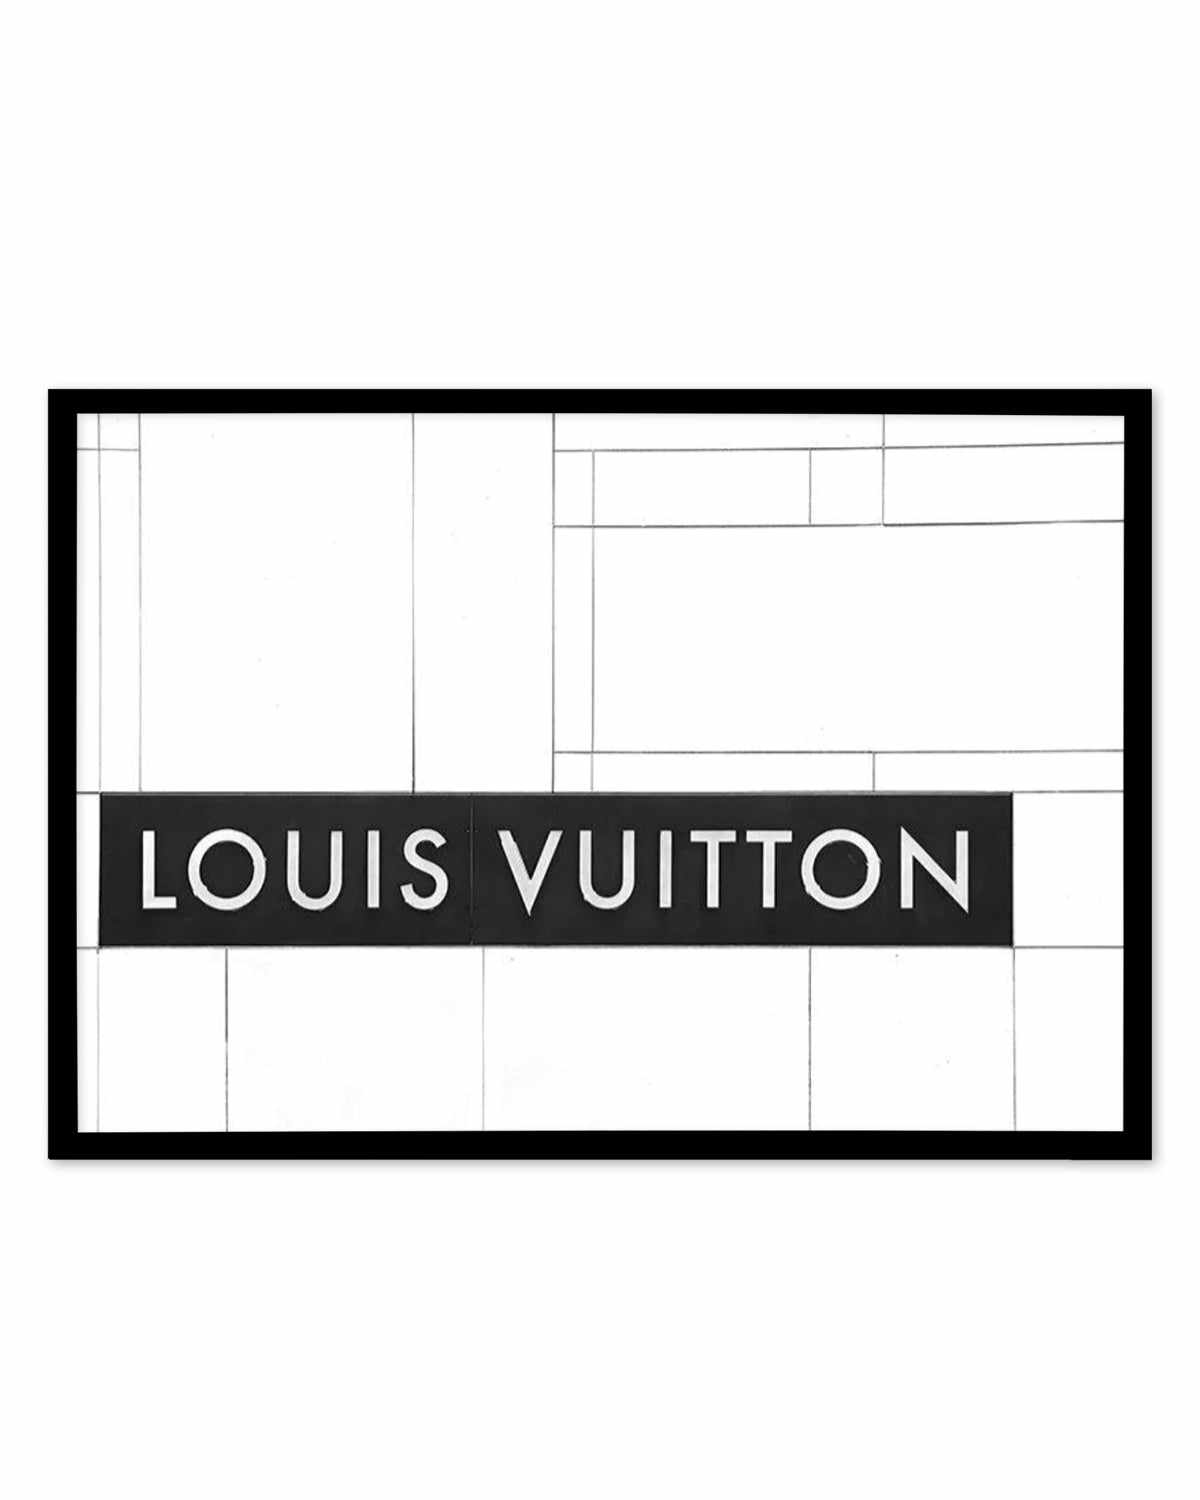 SHOP Louis Vuitton  Cannes Designer Art Print or Poster From